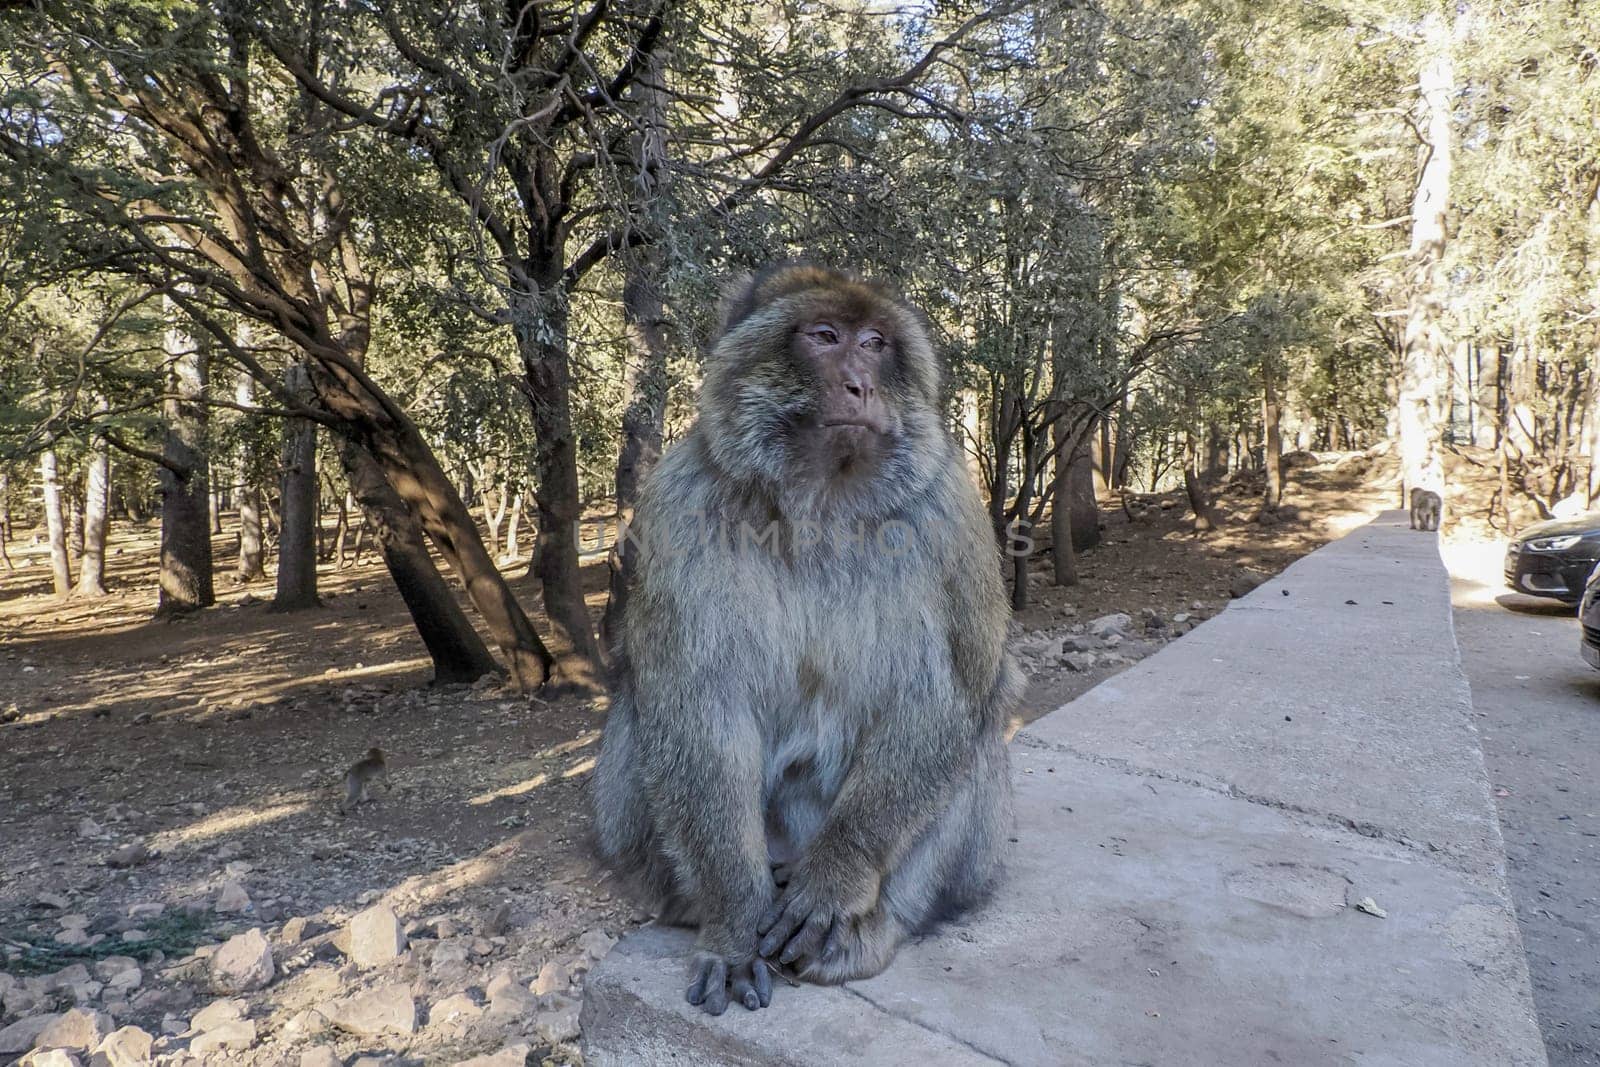 Monkey Barbary macaque, Ifrane national park, Morocco. by AndreaIzzotti